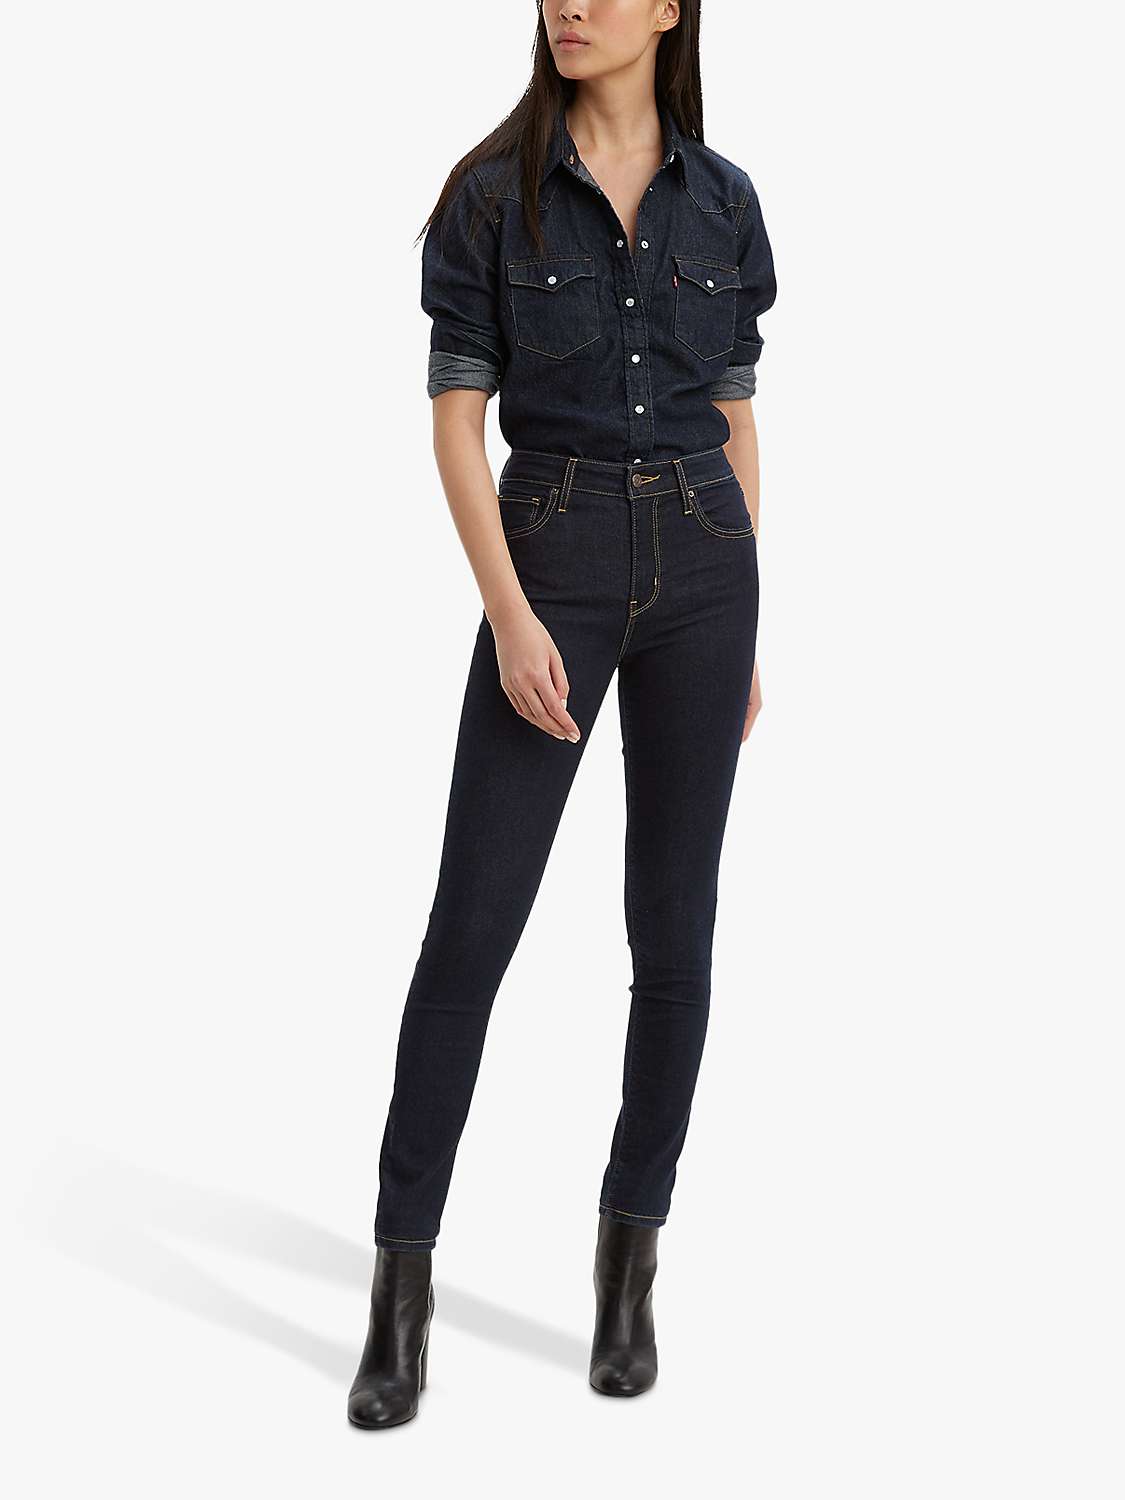 Buy Levi's 721 High Rise Skinny Jeans, To The Nine Online at johnlewis.com